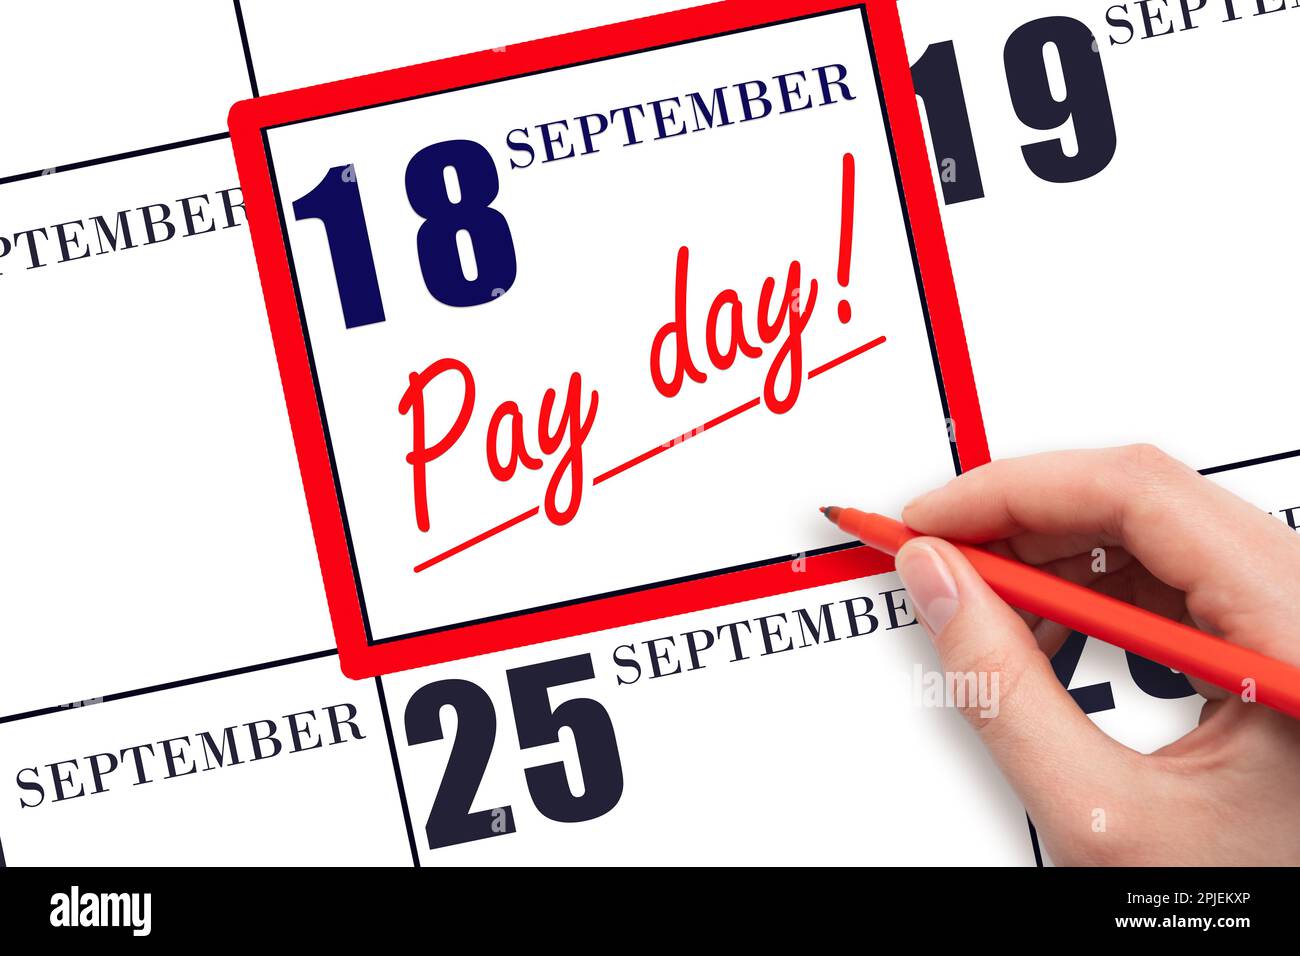 18th day of September. Hand writing text PAY DATE on calendar date September 18 and underline it. Payment due date. Reminder concept of payment. Autum Stock Photo